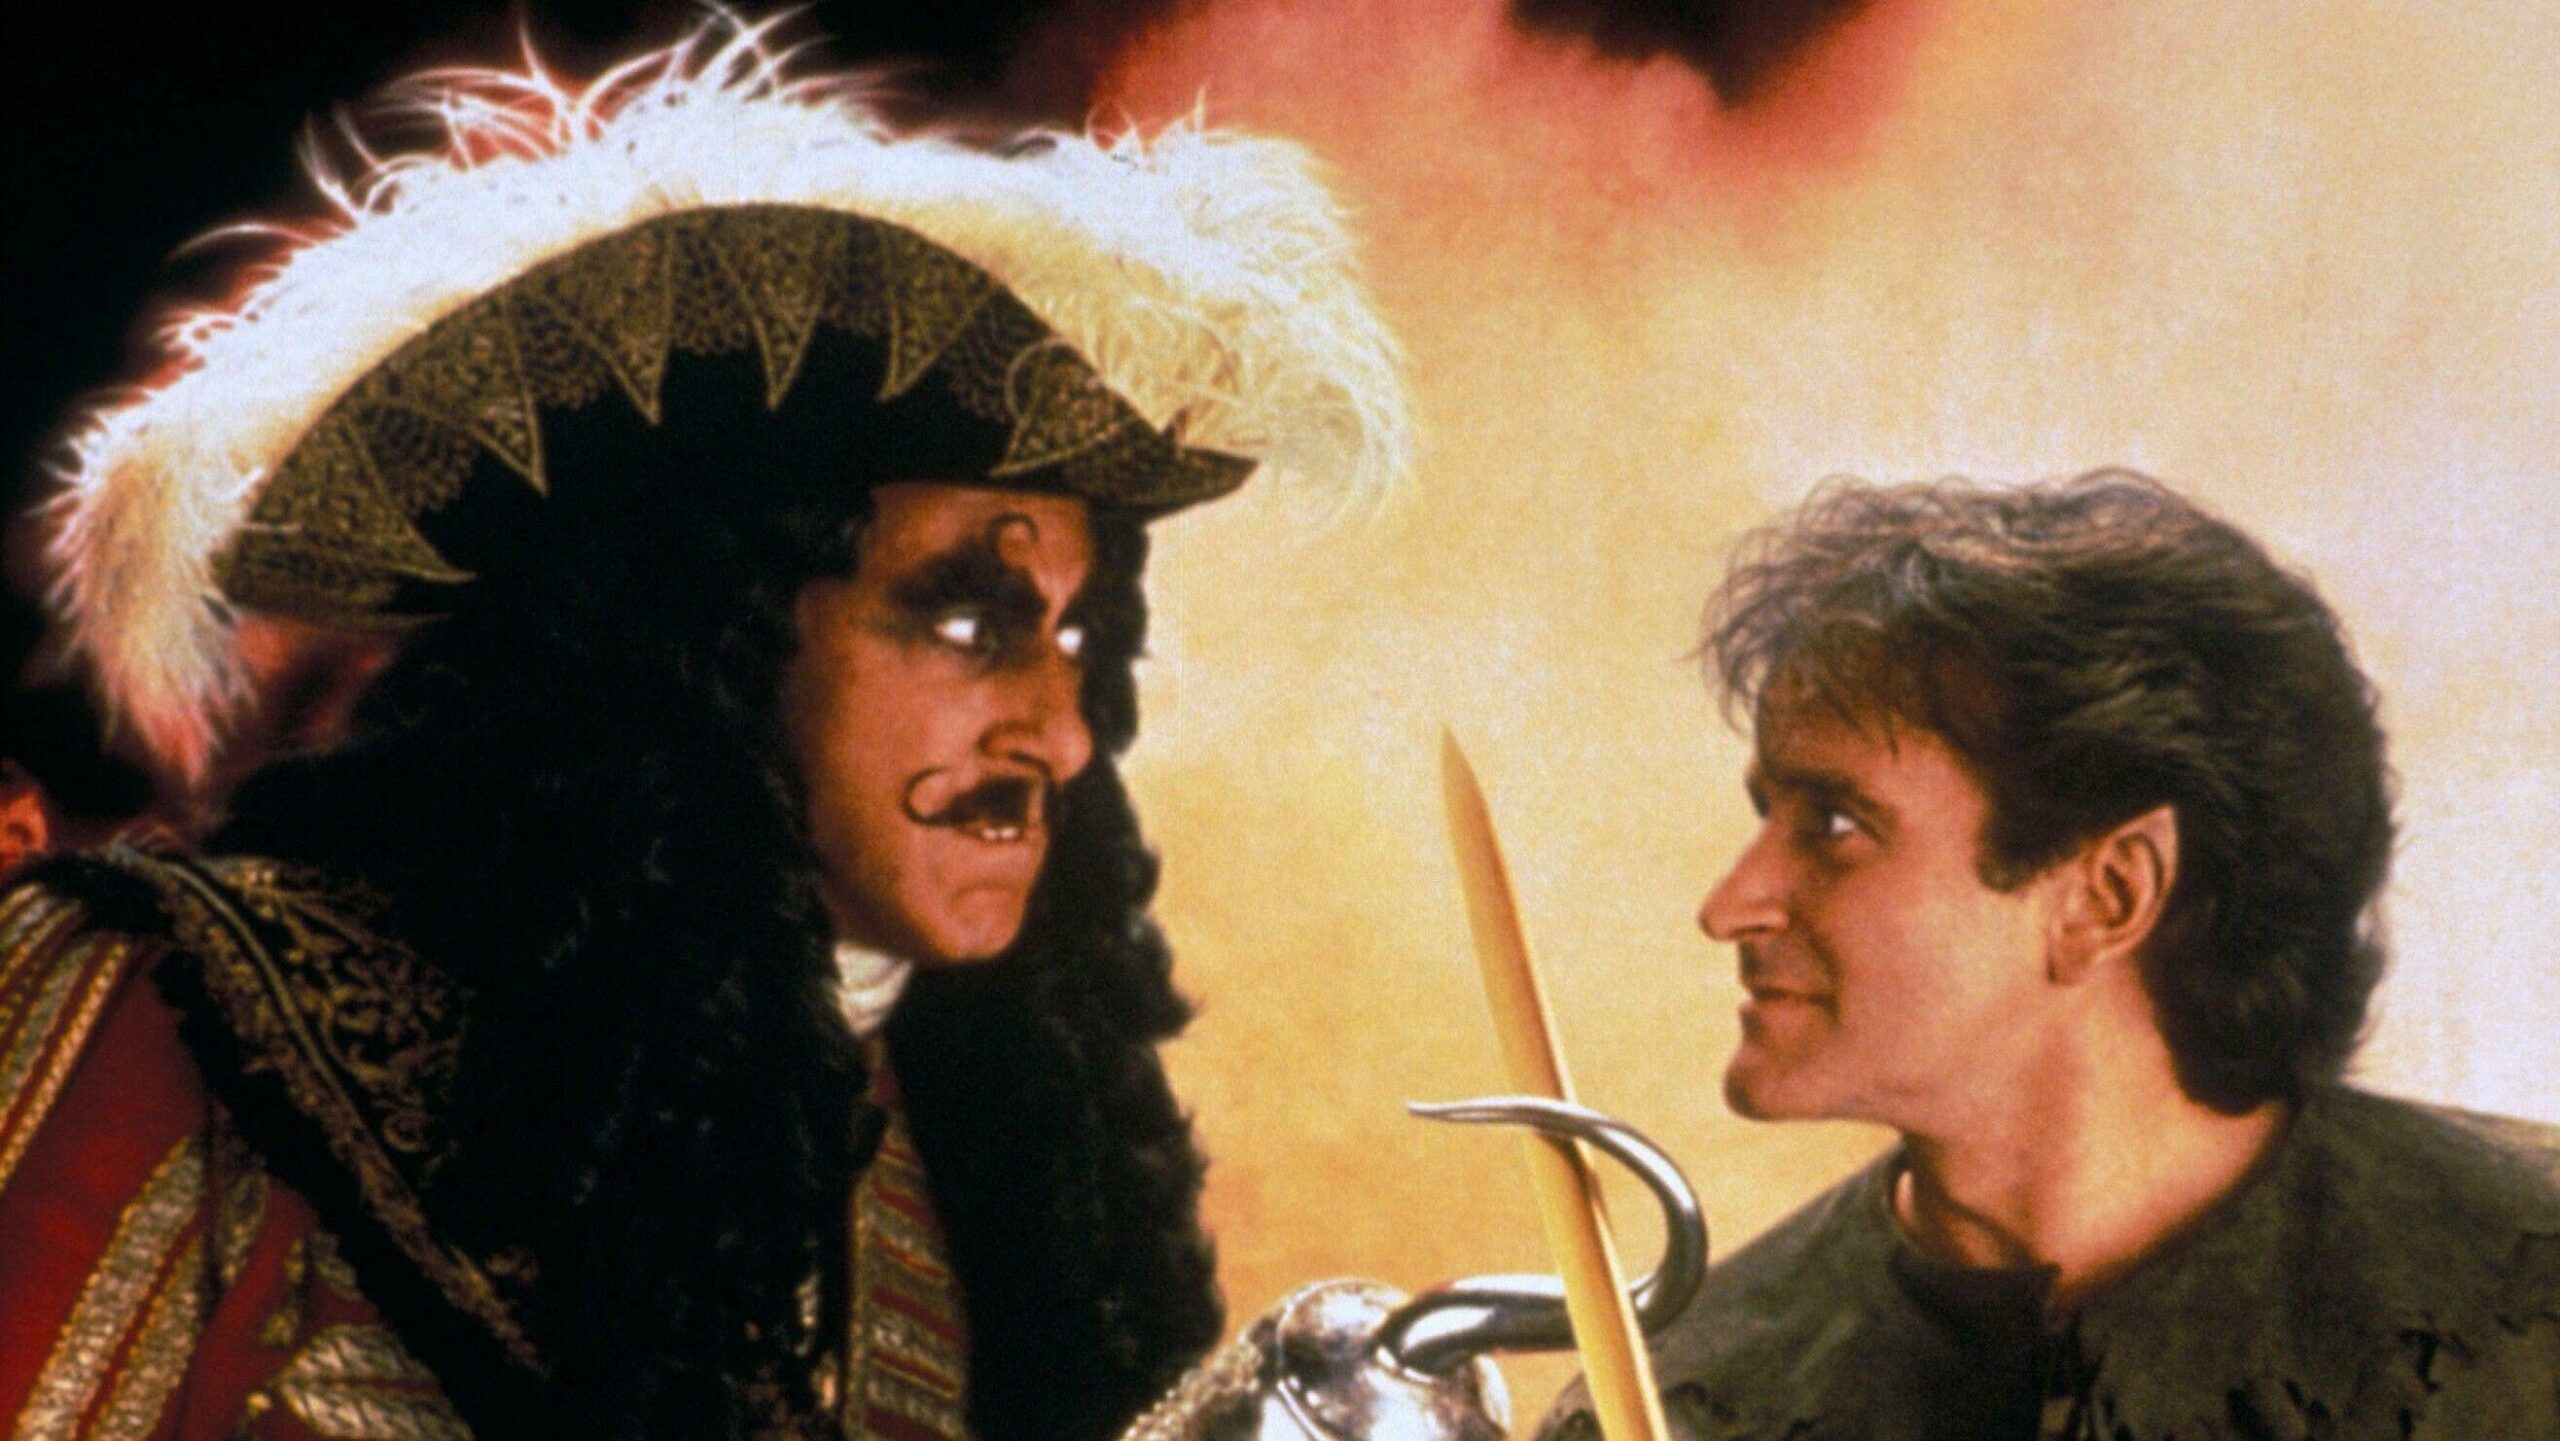 Did you know ‘Hook’ was once a musical? Now you can hear the movie’s long-lost songs